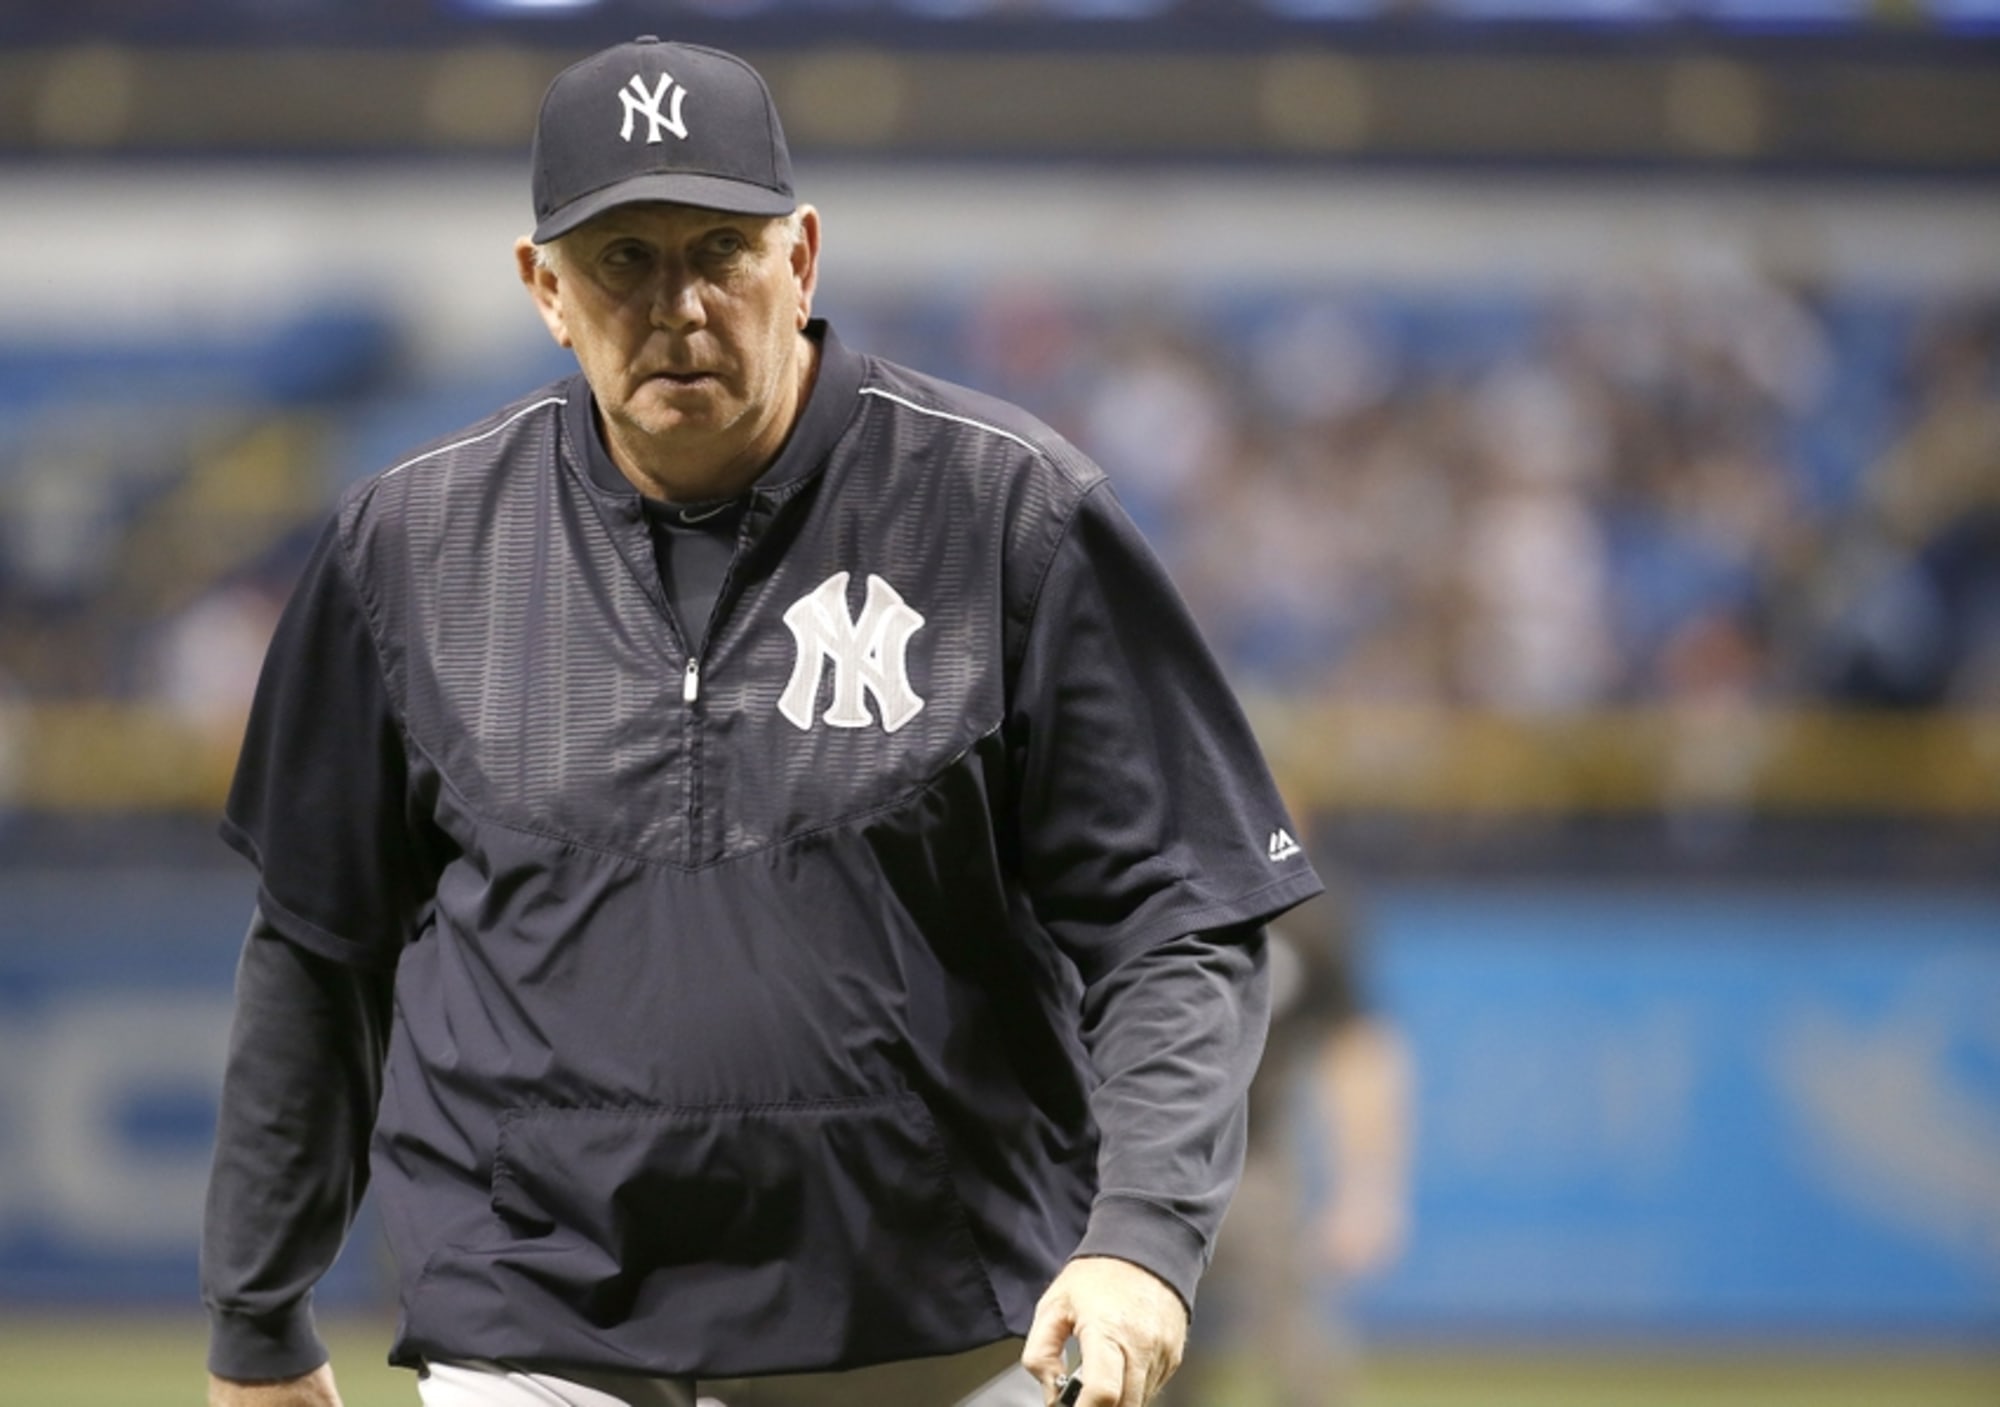 Yankees Pitching Coach Could Get the Axe After Staff's Disappointing Year